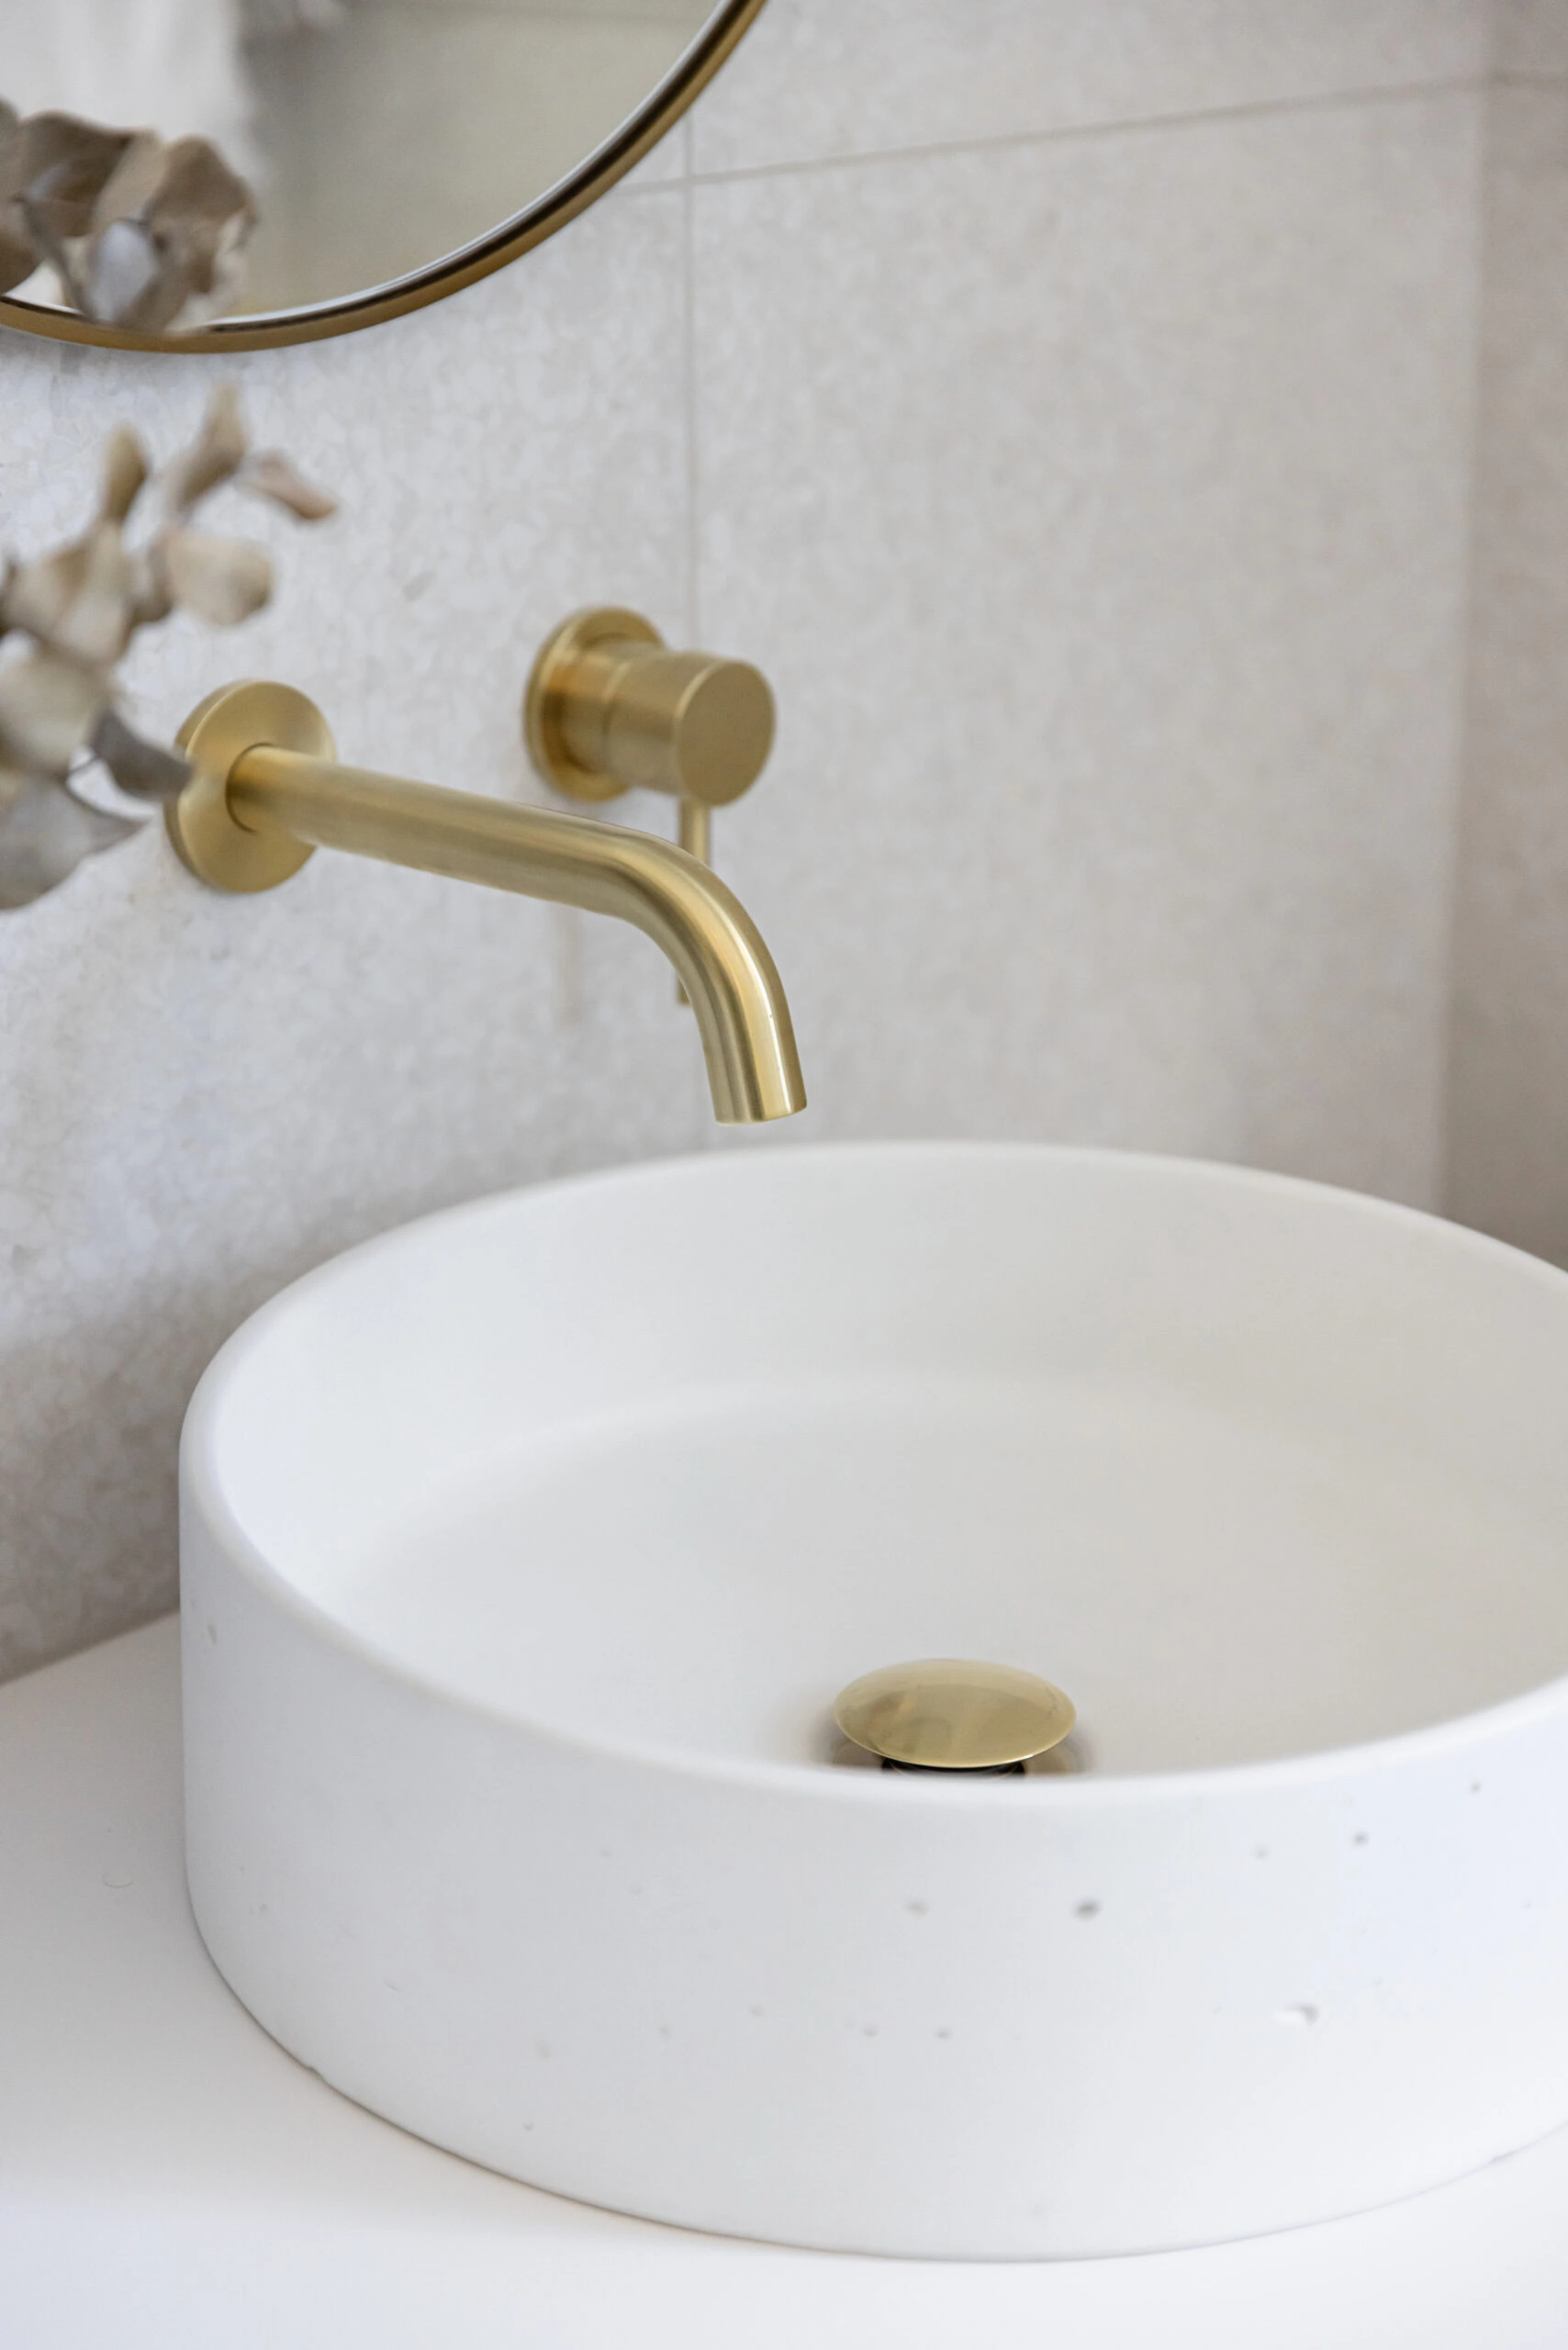 White and gold sink in a bathroom renovation photo.